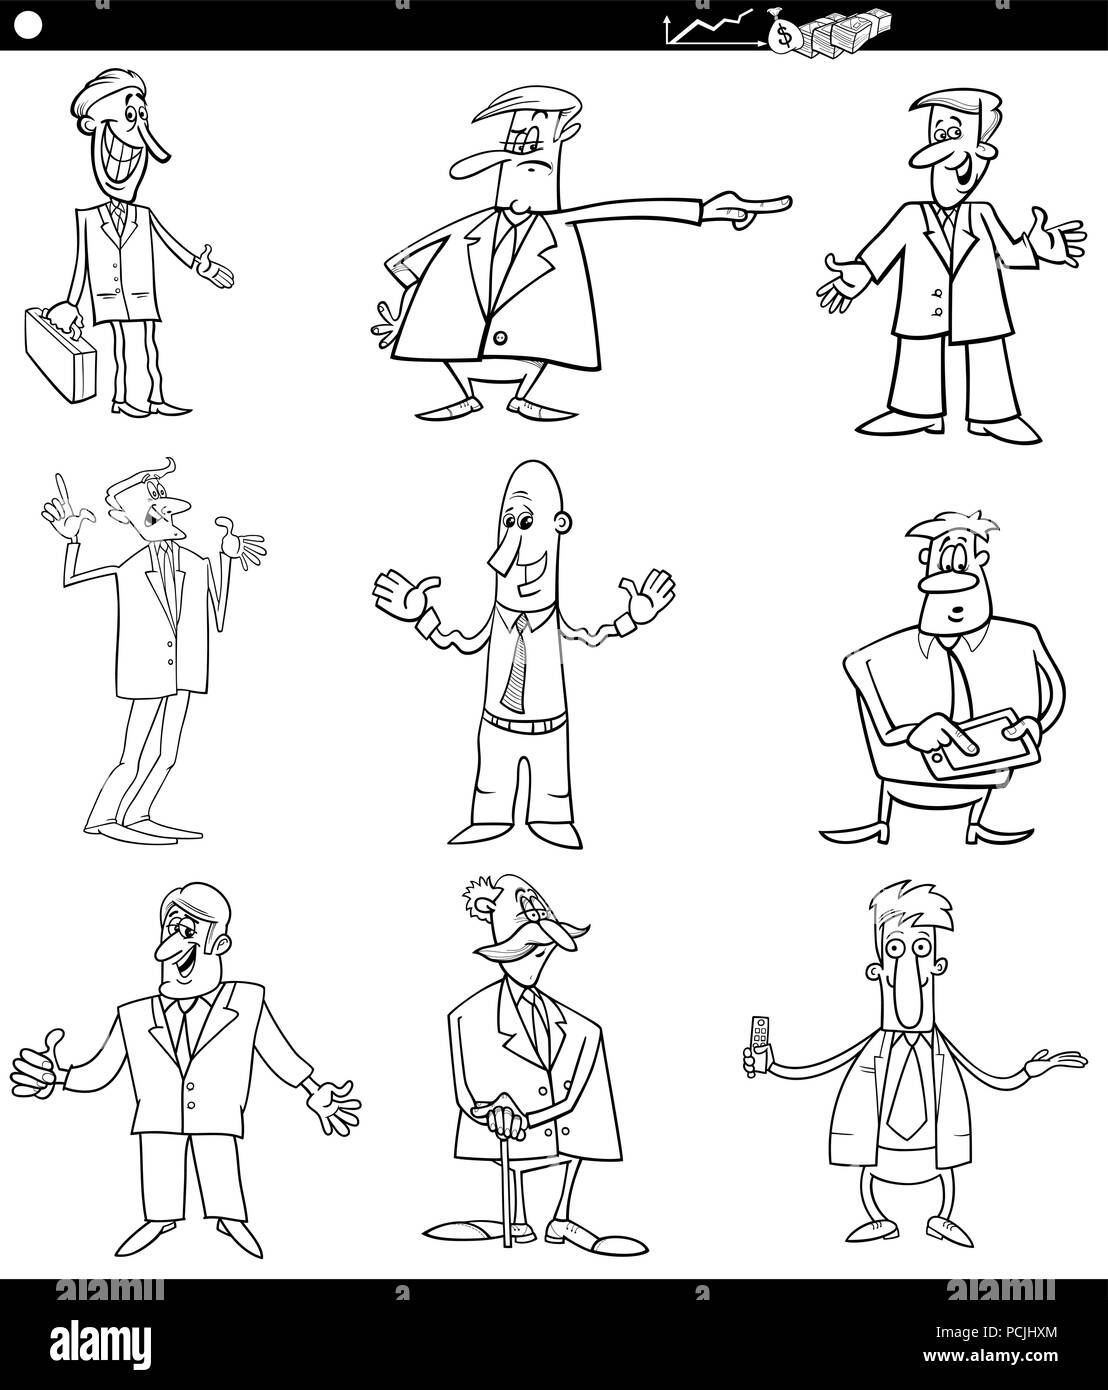 Black and White Cartoon Illustration of Funny Men or Businessmen Characters Set Stock Vector